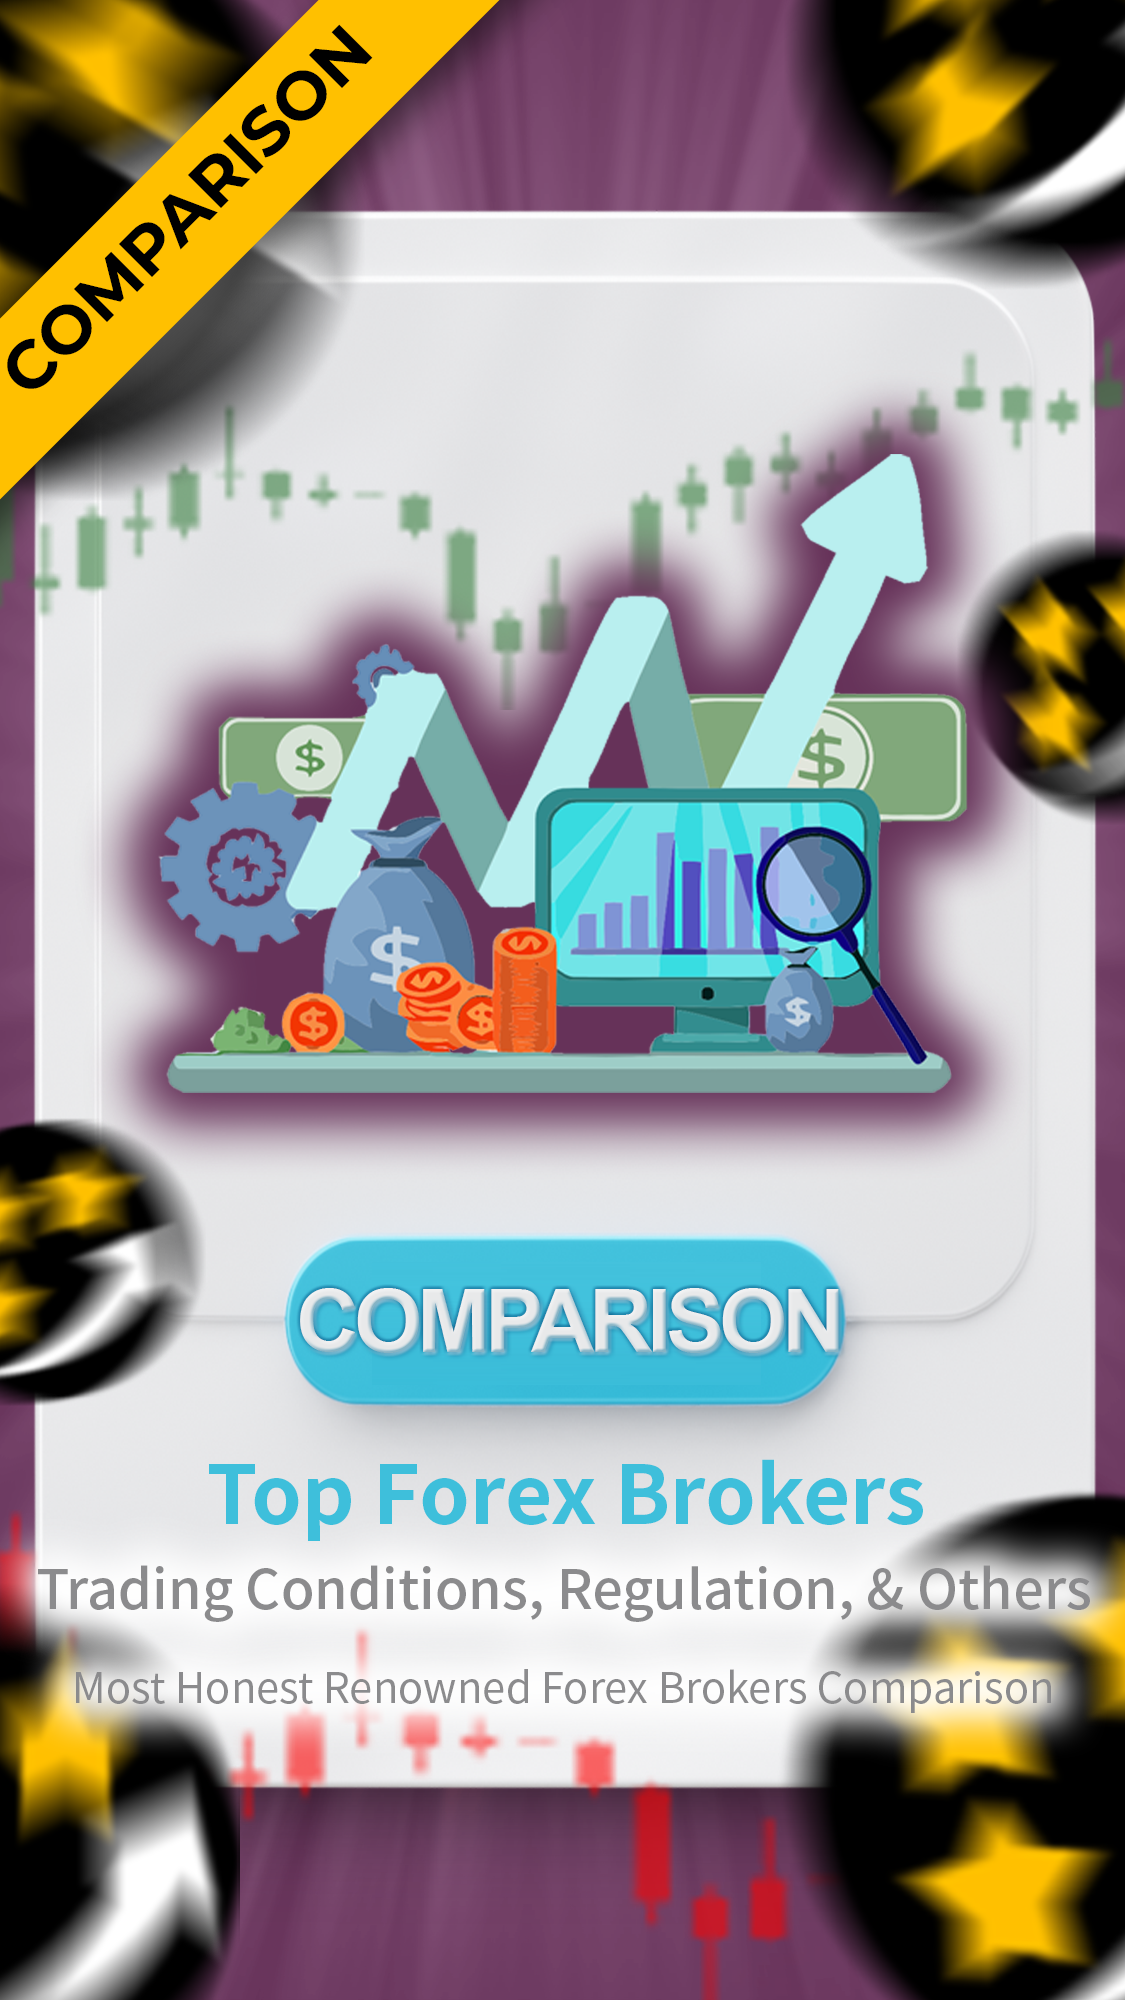 Top 100 forex brokers 2012 olympics forex currency forecast